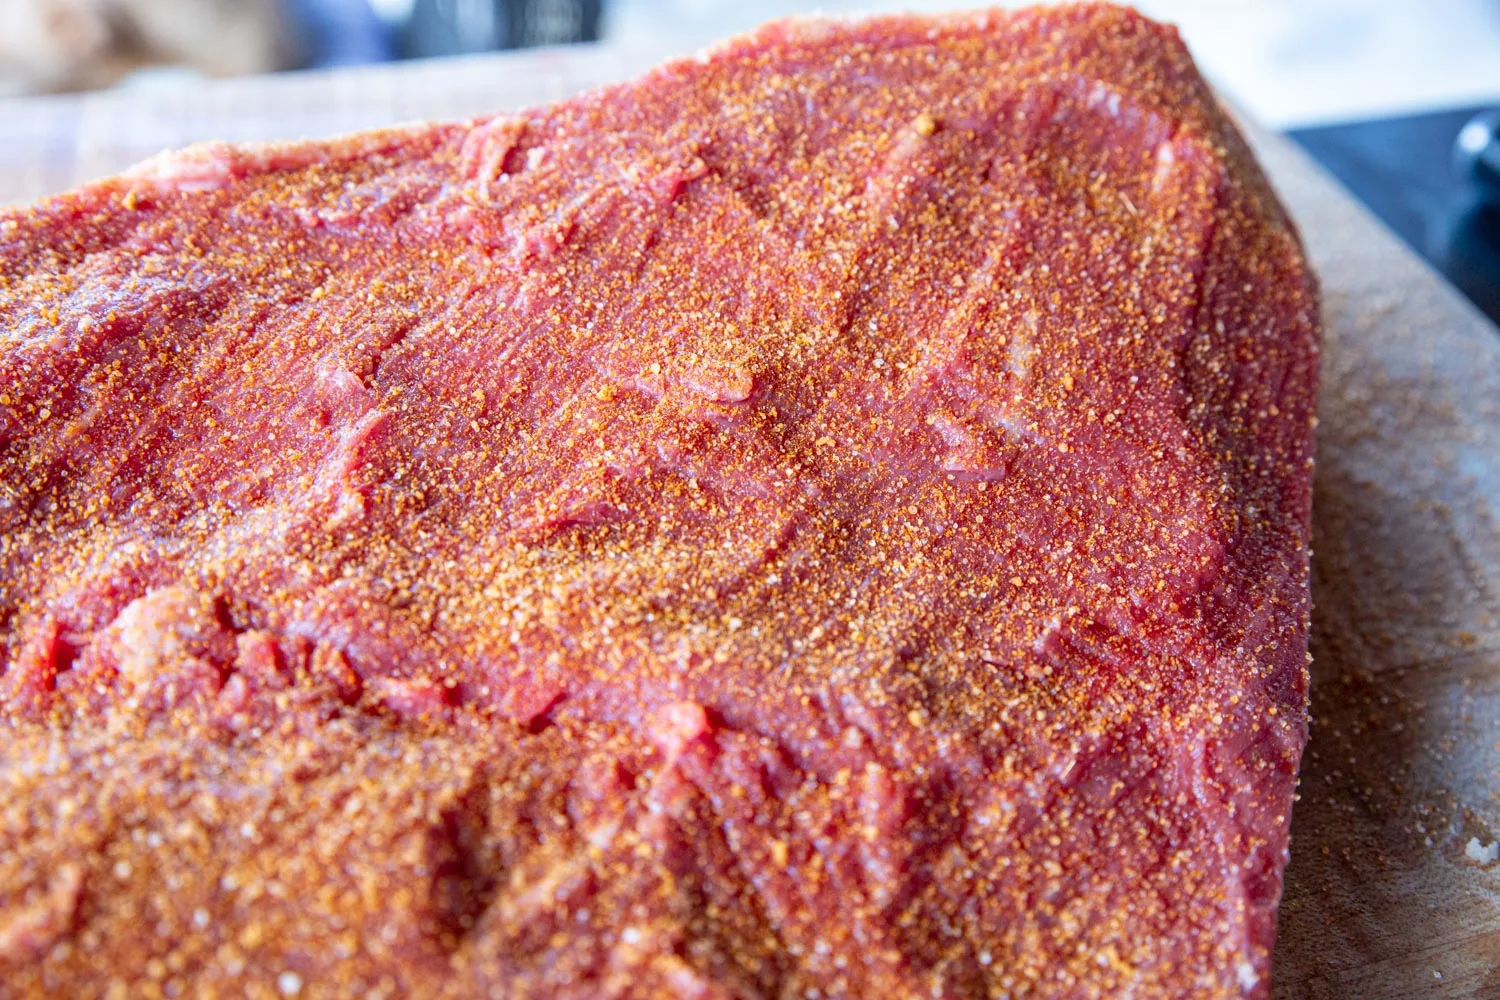 A close up of sprinkling the rub on the brisket where it can still breathe.